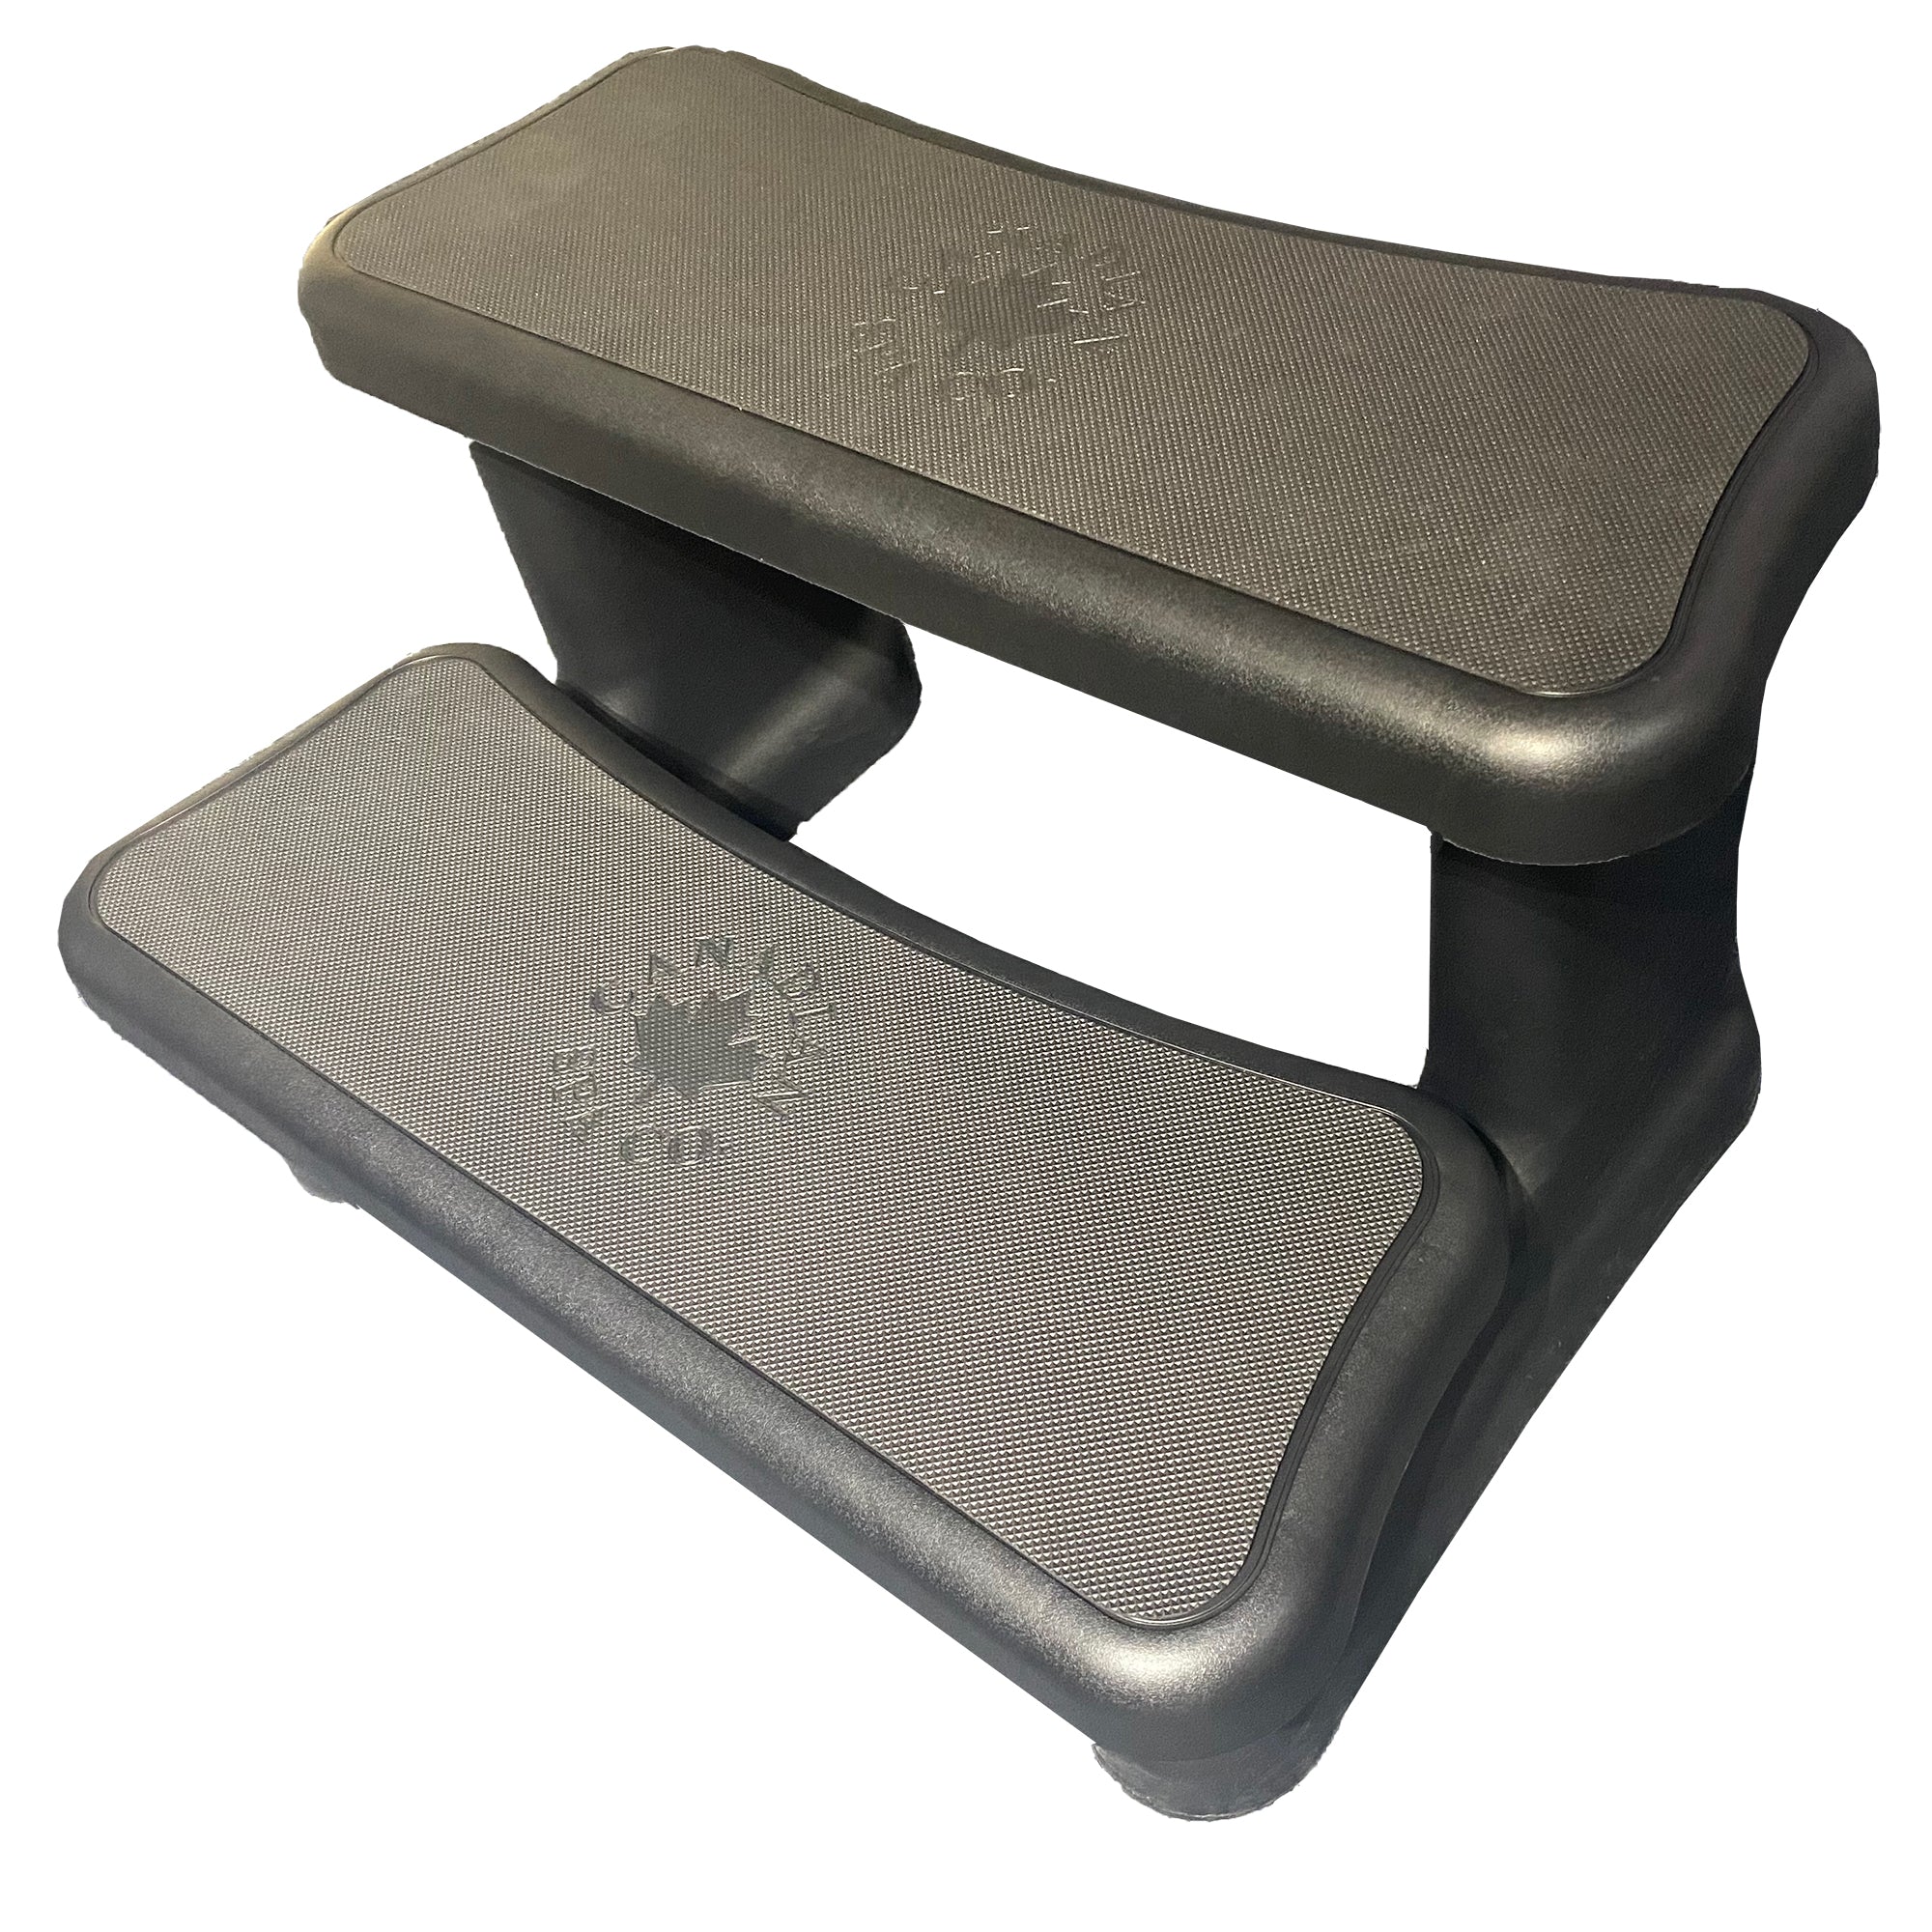 Canadian Spa Universal Spa Steps - Black - in a white background - KF-10061 - Vital Hydrotherapy